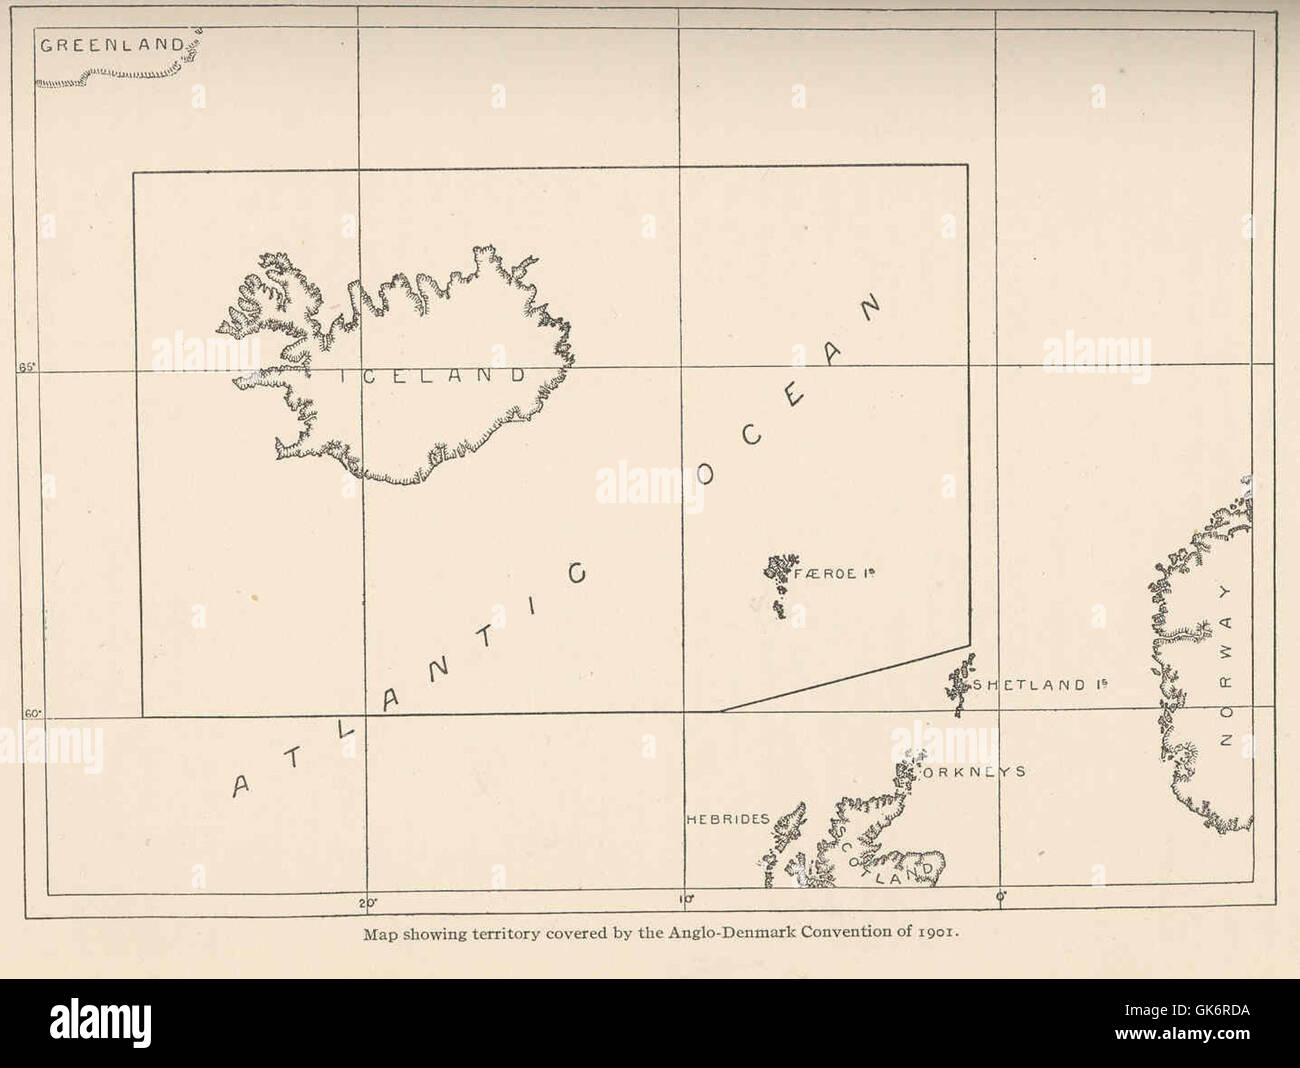 42084 Map shoing territory covered by the Anglo-Denmark Convention of 1901 Stock Photo